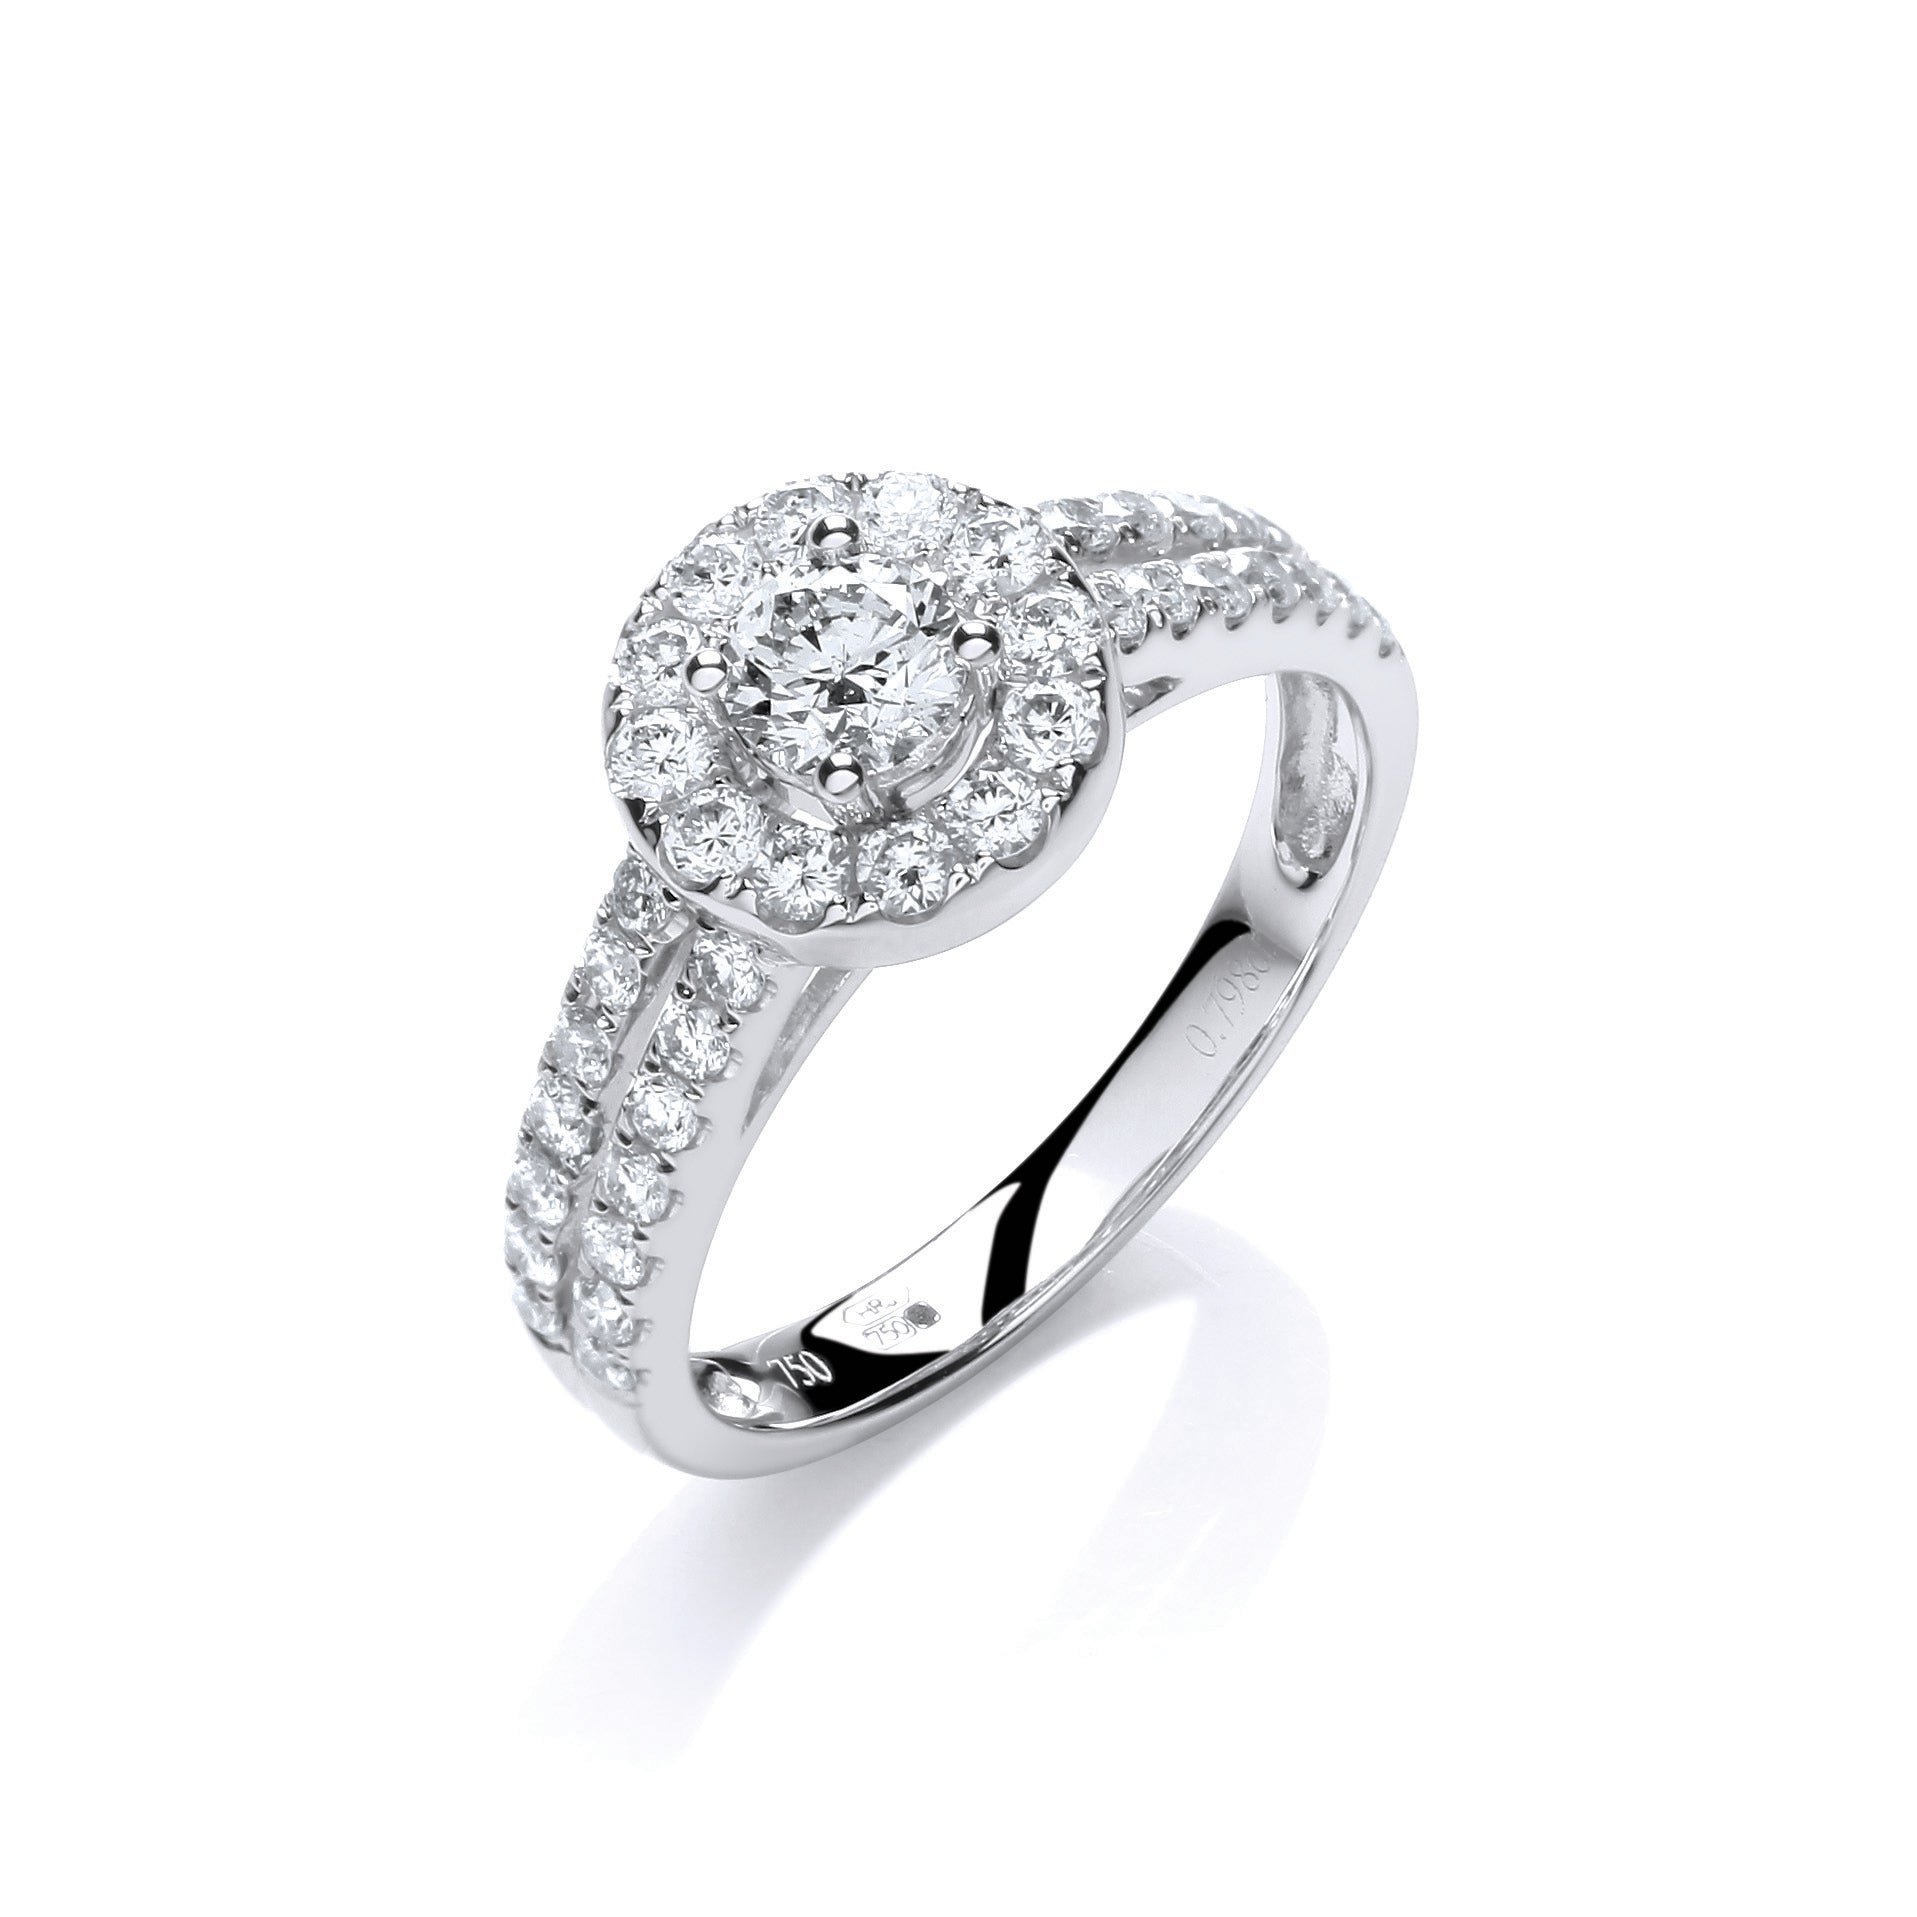 Diamond Ring with Halo and Set Shoulders